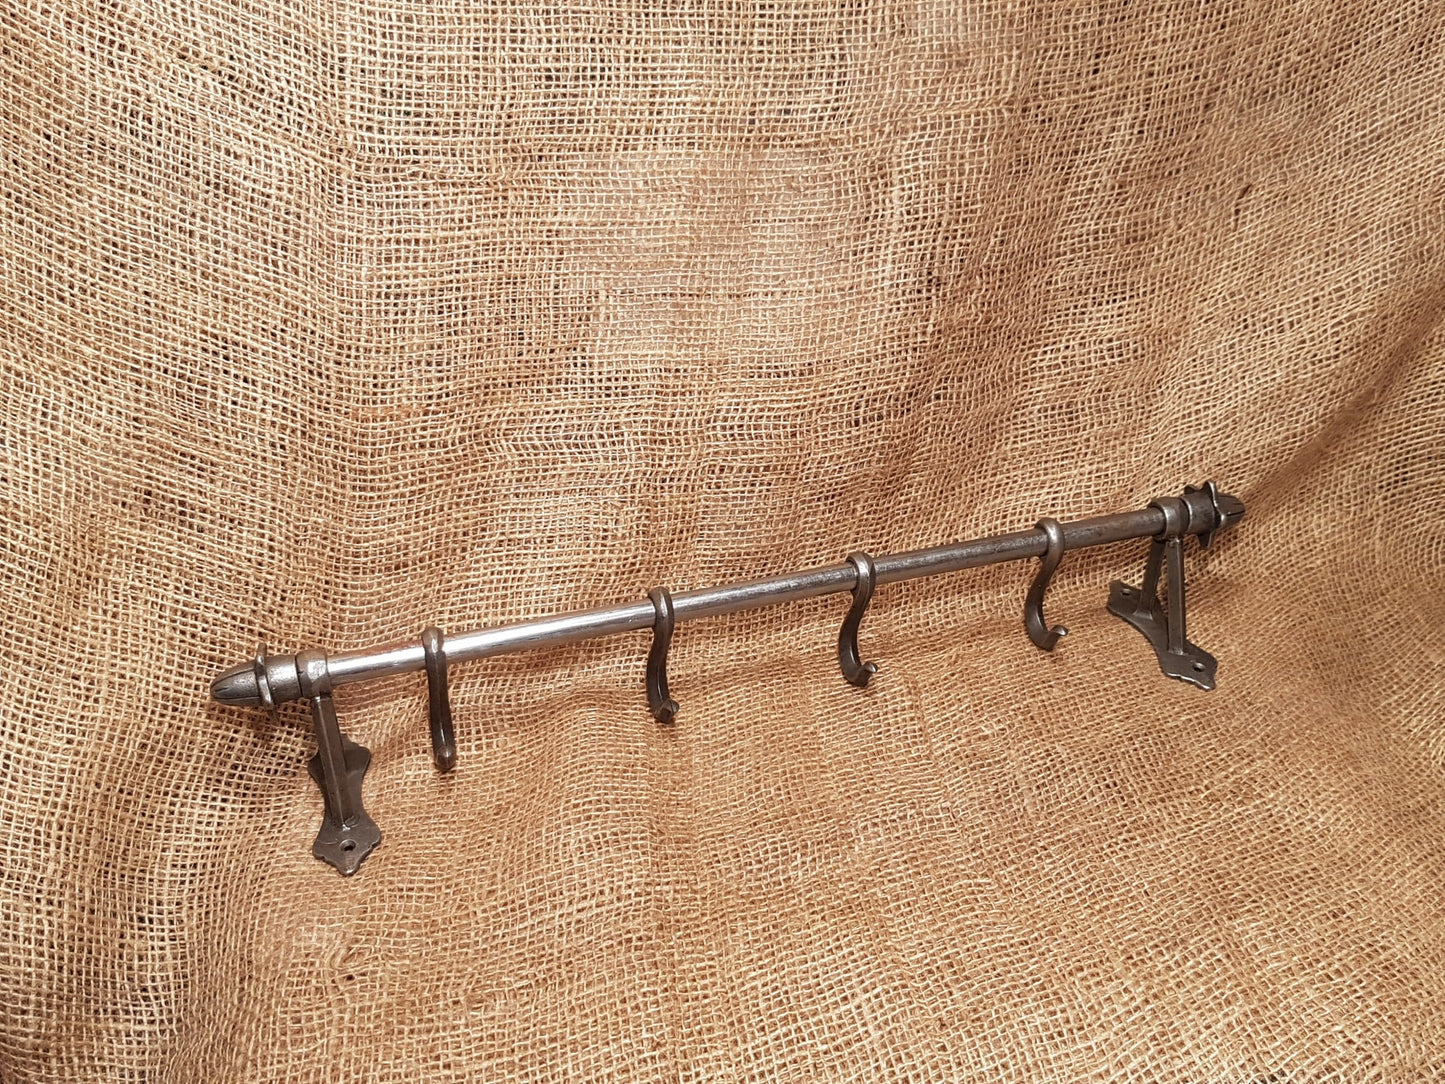 Vintage Hook Rail - 20" - Spearhead Collection - Rails & Rings - Hardware, Home Decor, Hook Rails, Hooks, Kitchen Decor, Rails Rings & Eye Loops, Rods and Rails